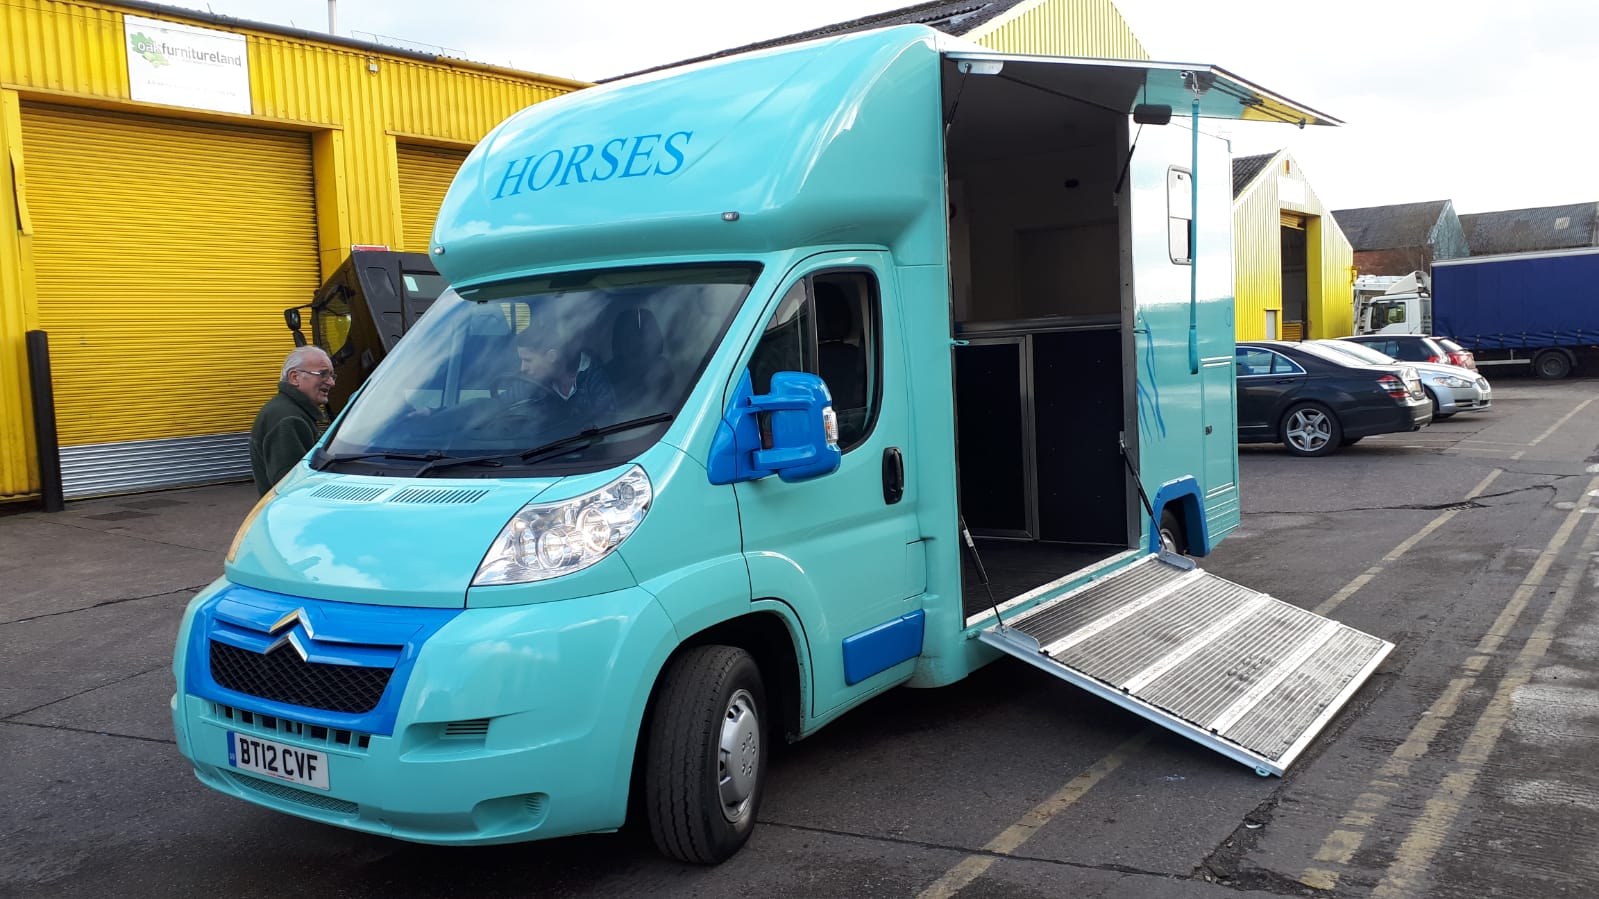 3.5 Horseboxes For Sale